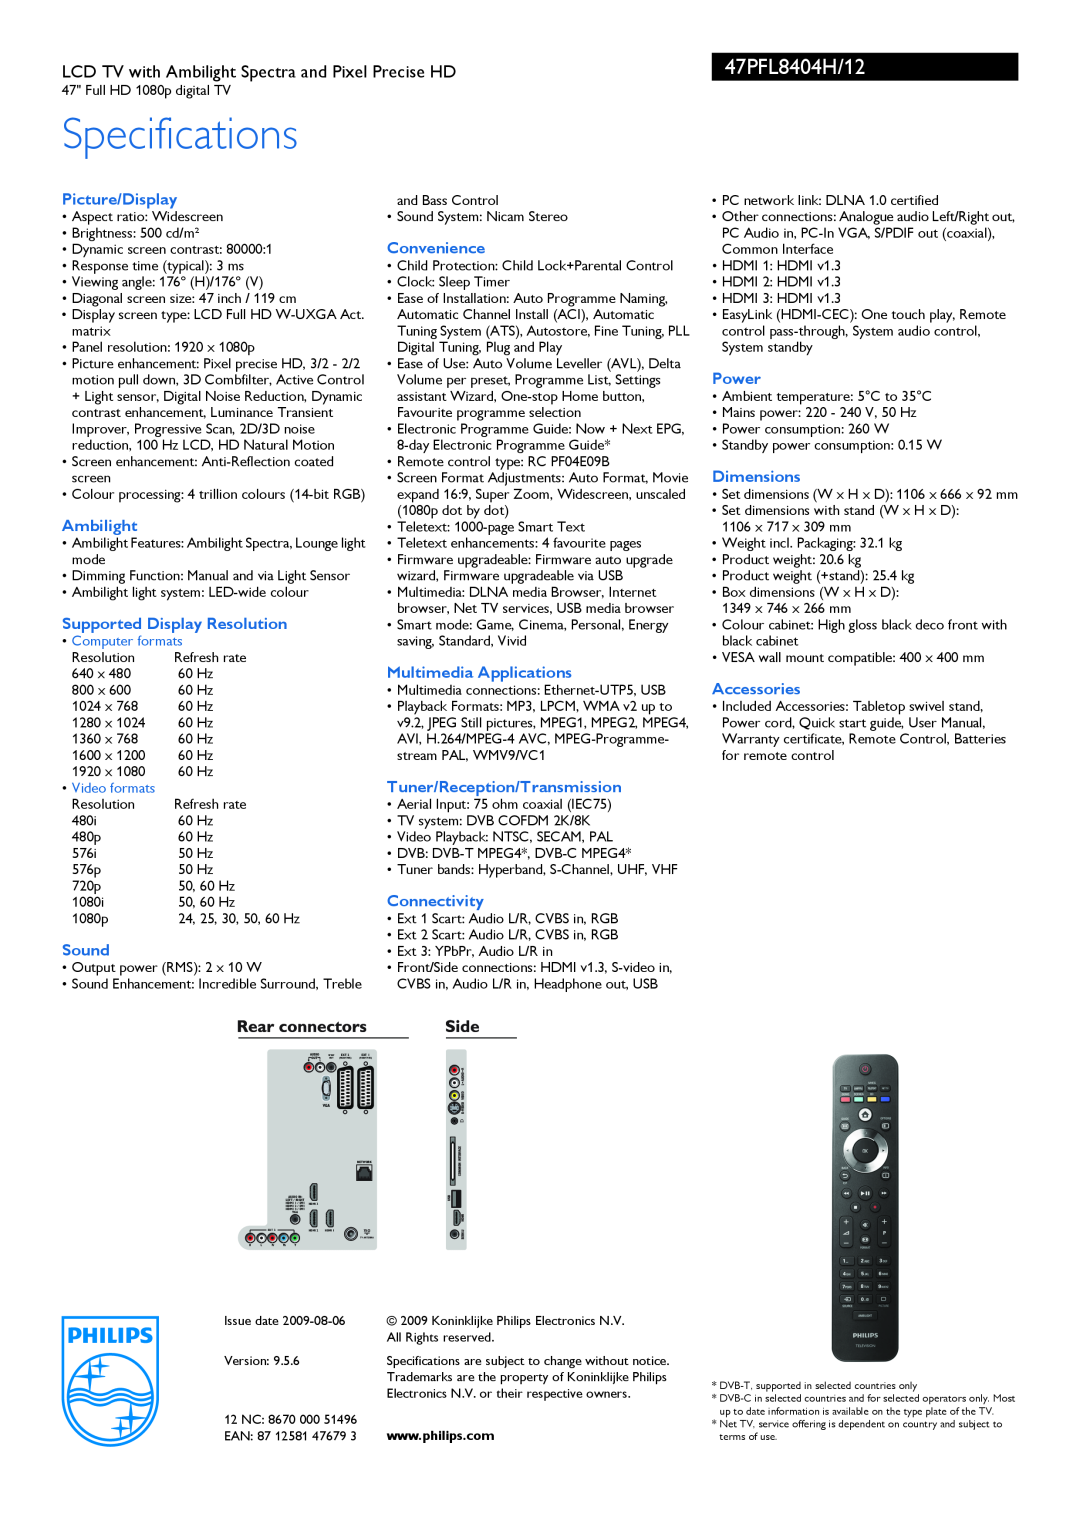 Philips 47PFL8404H/12 Specifications, Picture/Display, Ambilight, Supported Display Resolution, Sound, Convenience, Power 